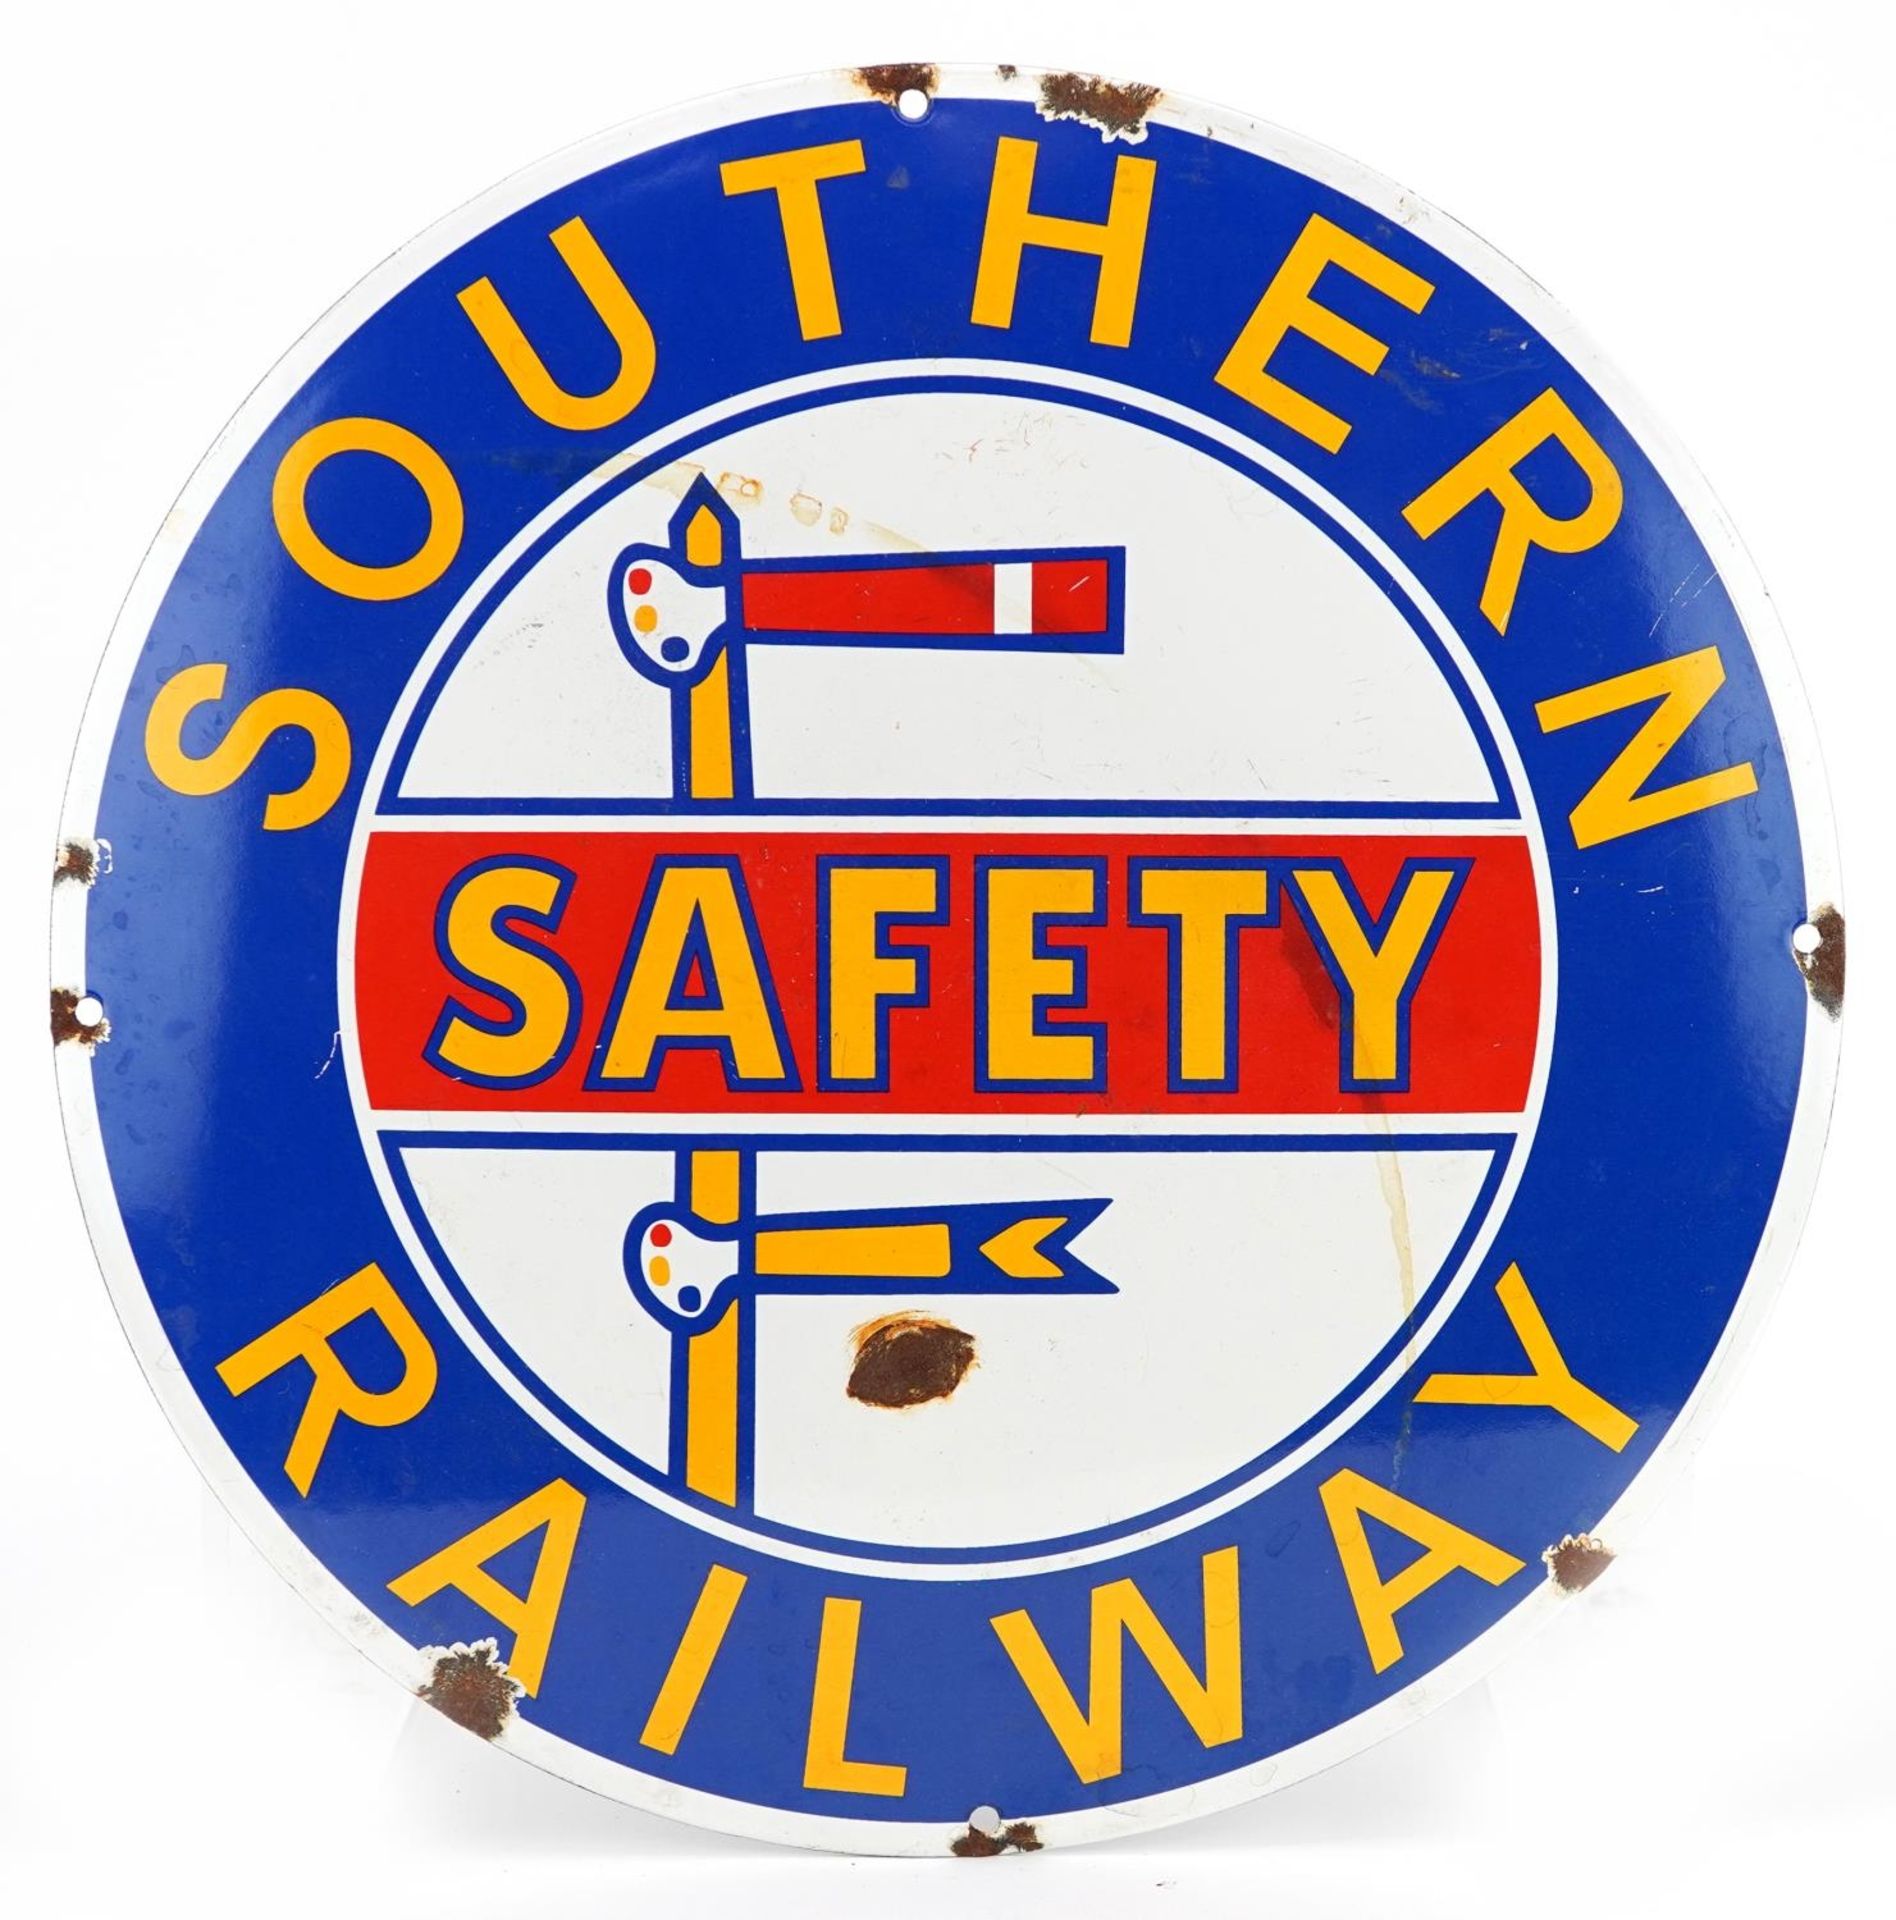 Circular Southern Railway Safety enamel advertising sign, 36cm in diameter : For further information